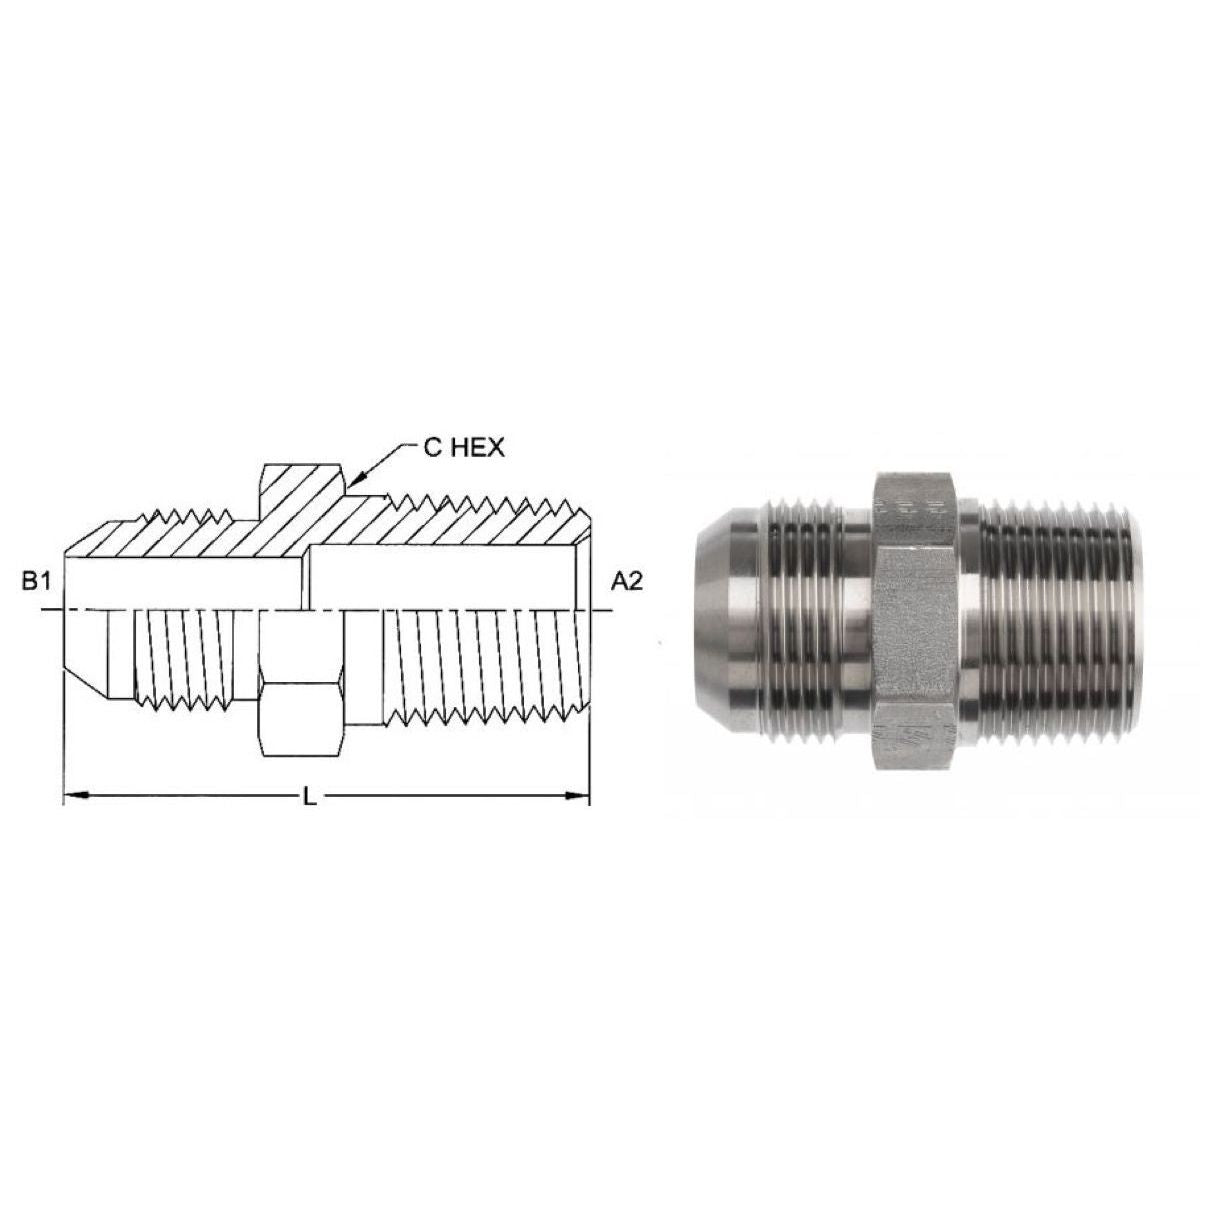 2404-03-04-SS : OneHydraulics Adapter, Straight, 0.1875 (3/16") Male NPT x 0.25 (1/4") Male, Stainless Steel, 7200psi